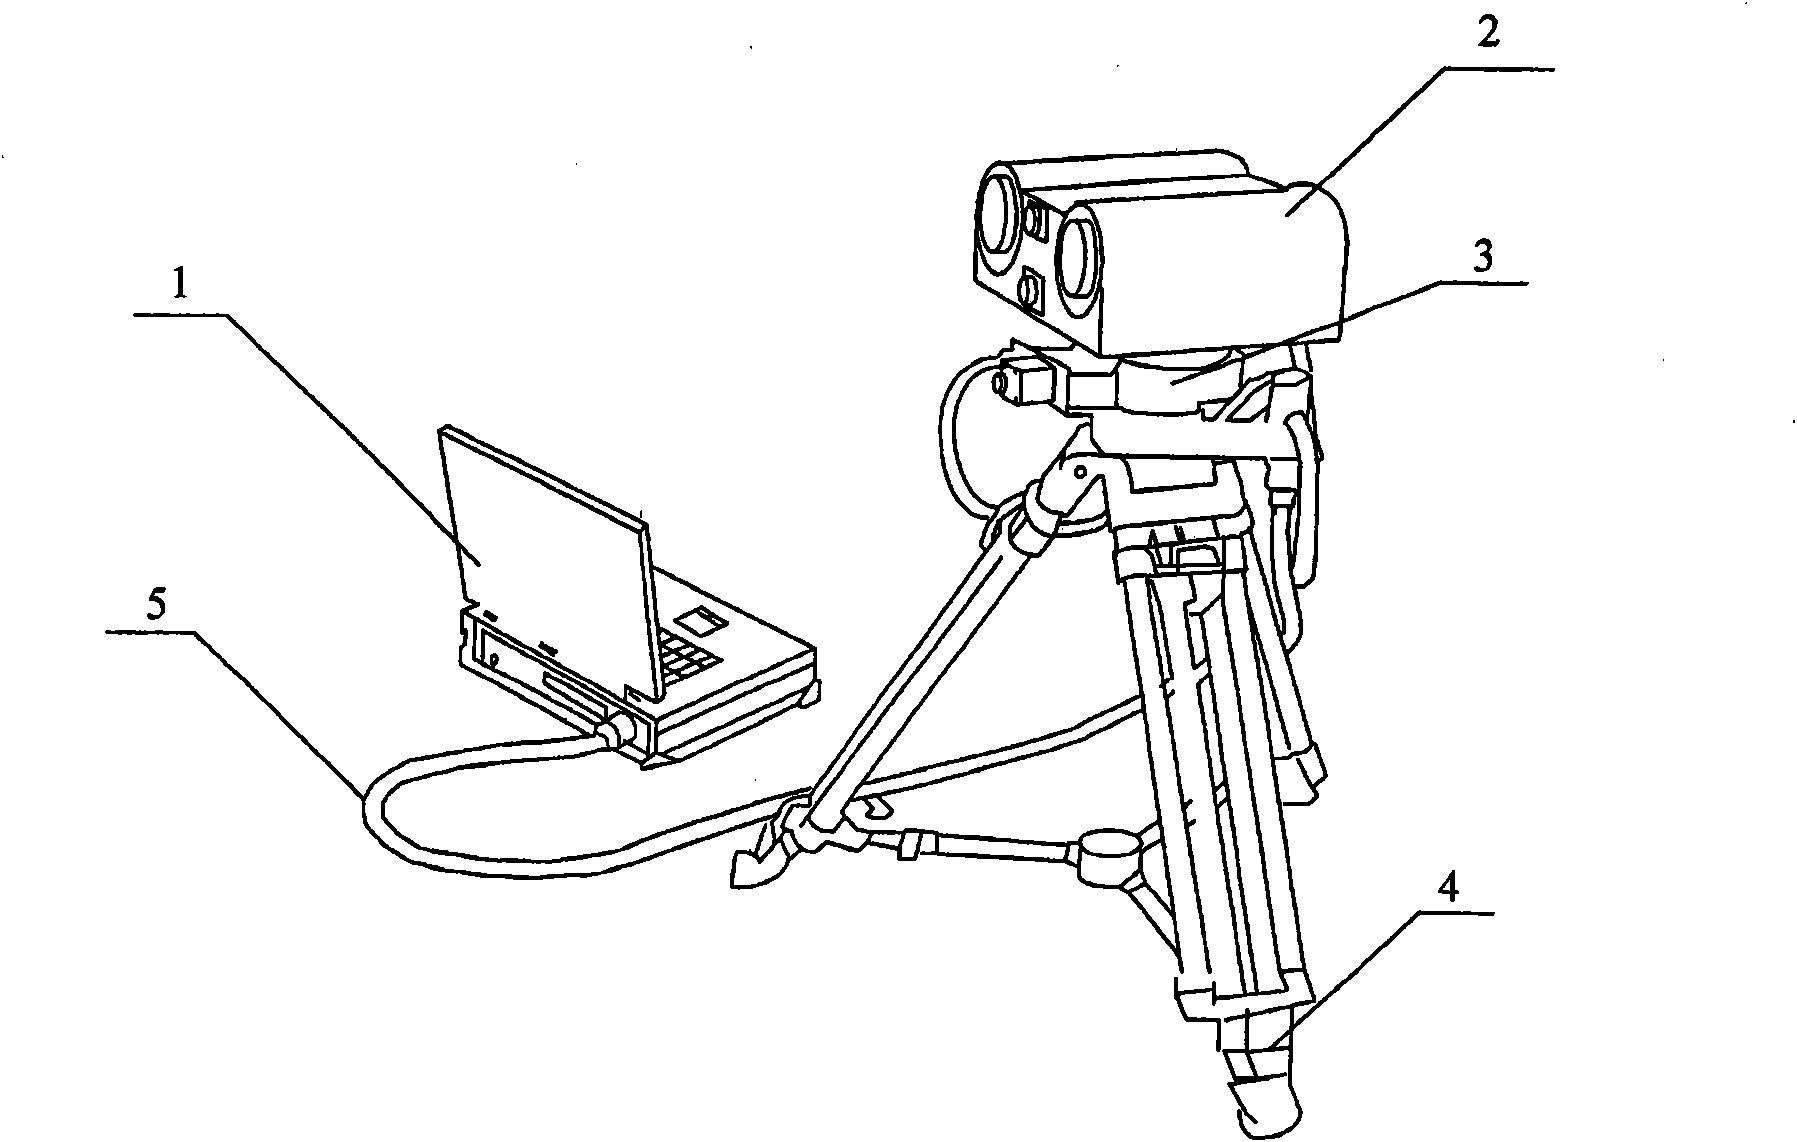 Anti-sniper laser active detection system and method